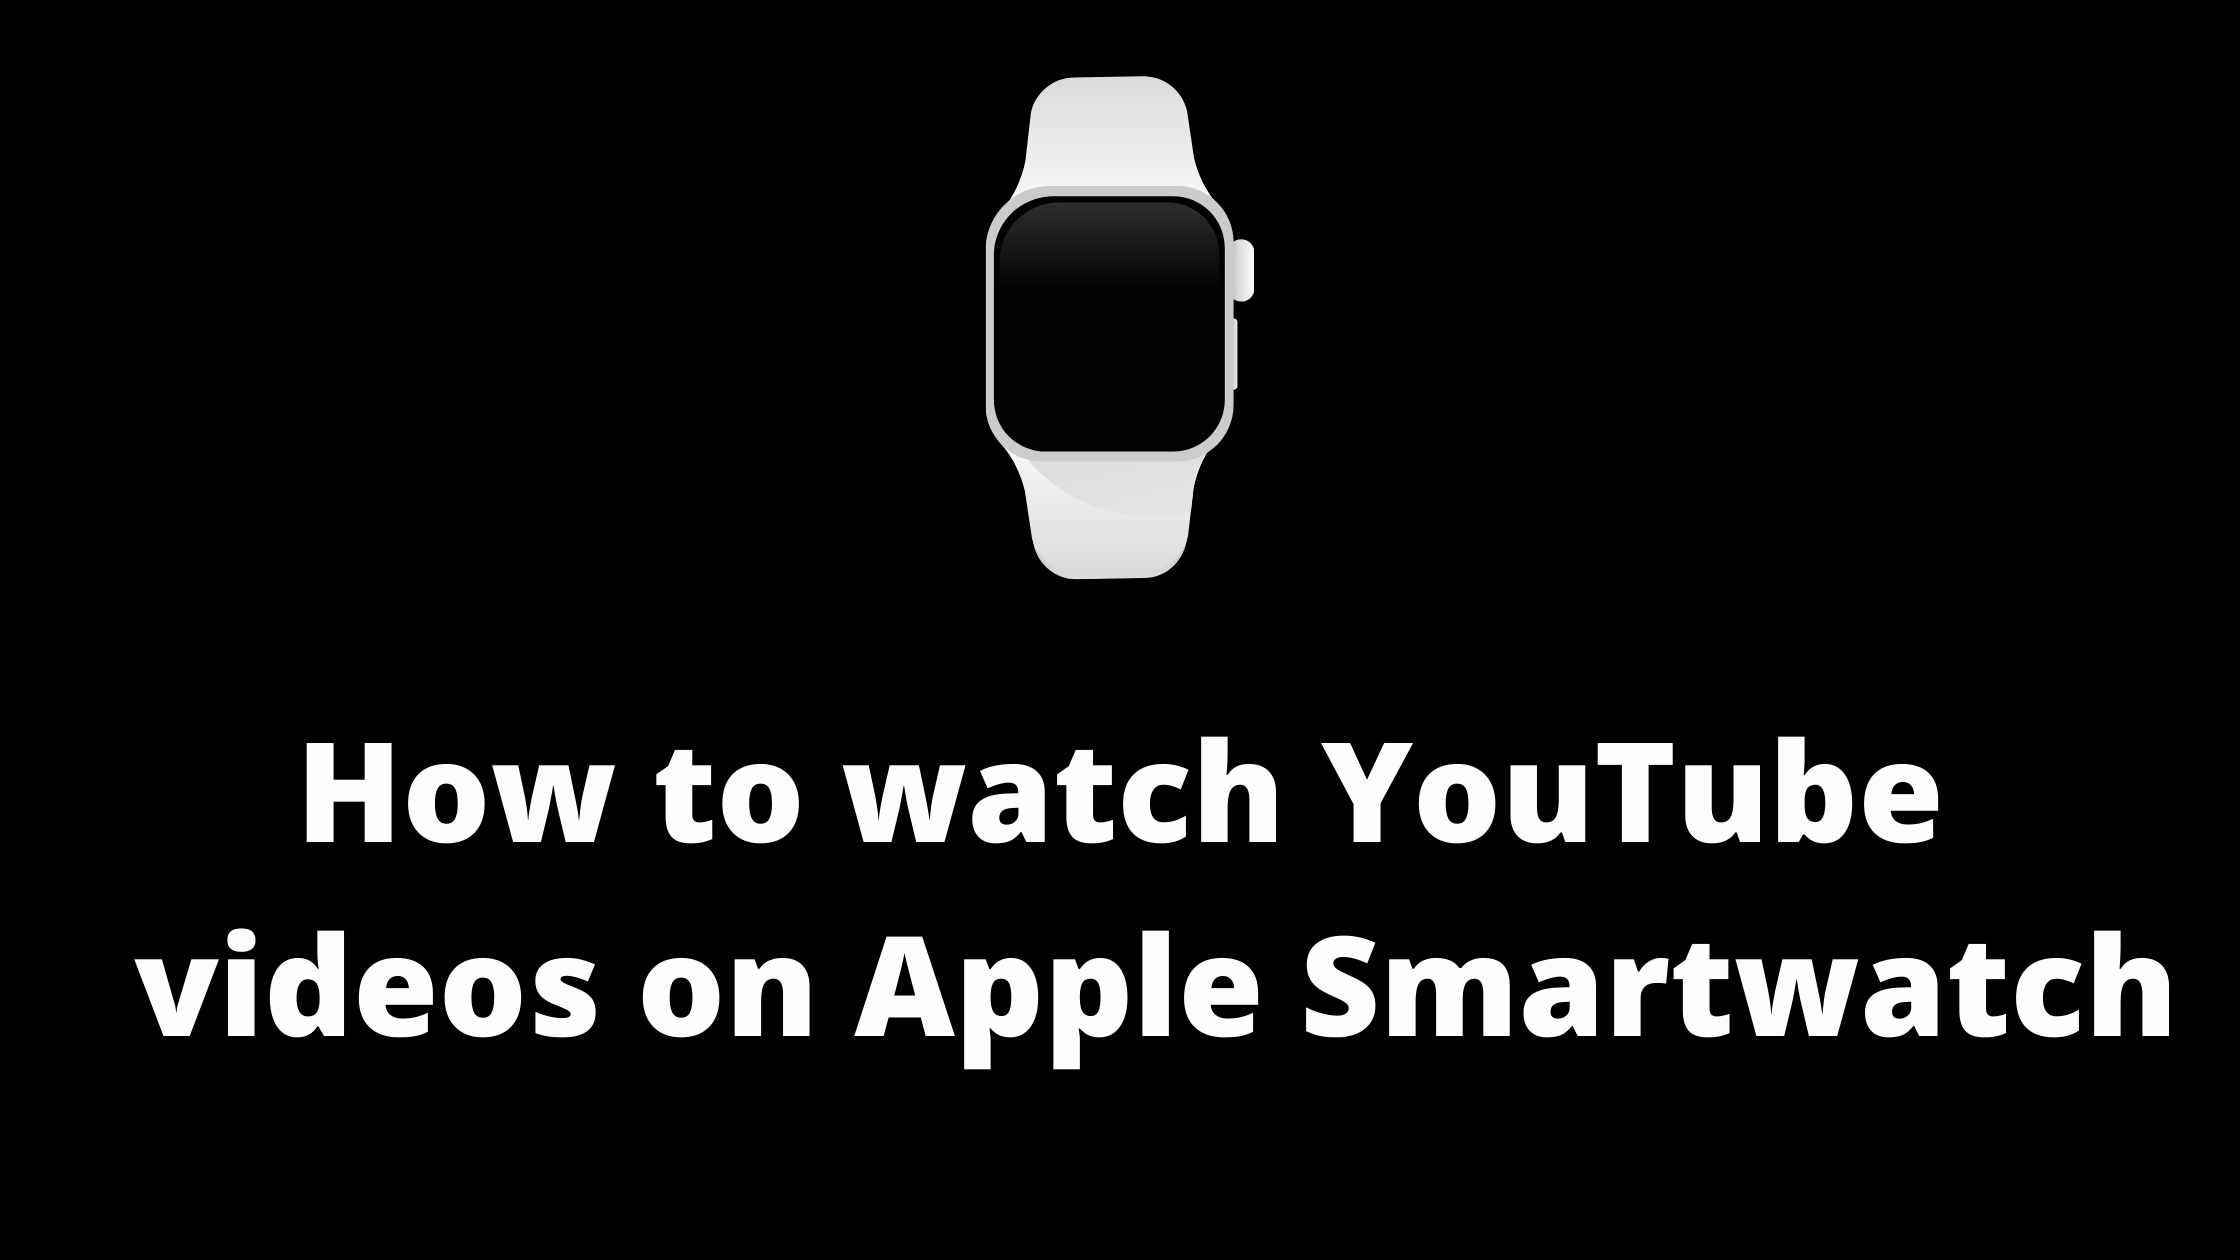 how to watch youtube Videos on smartwatch